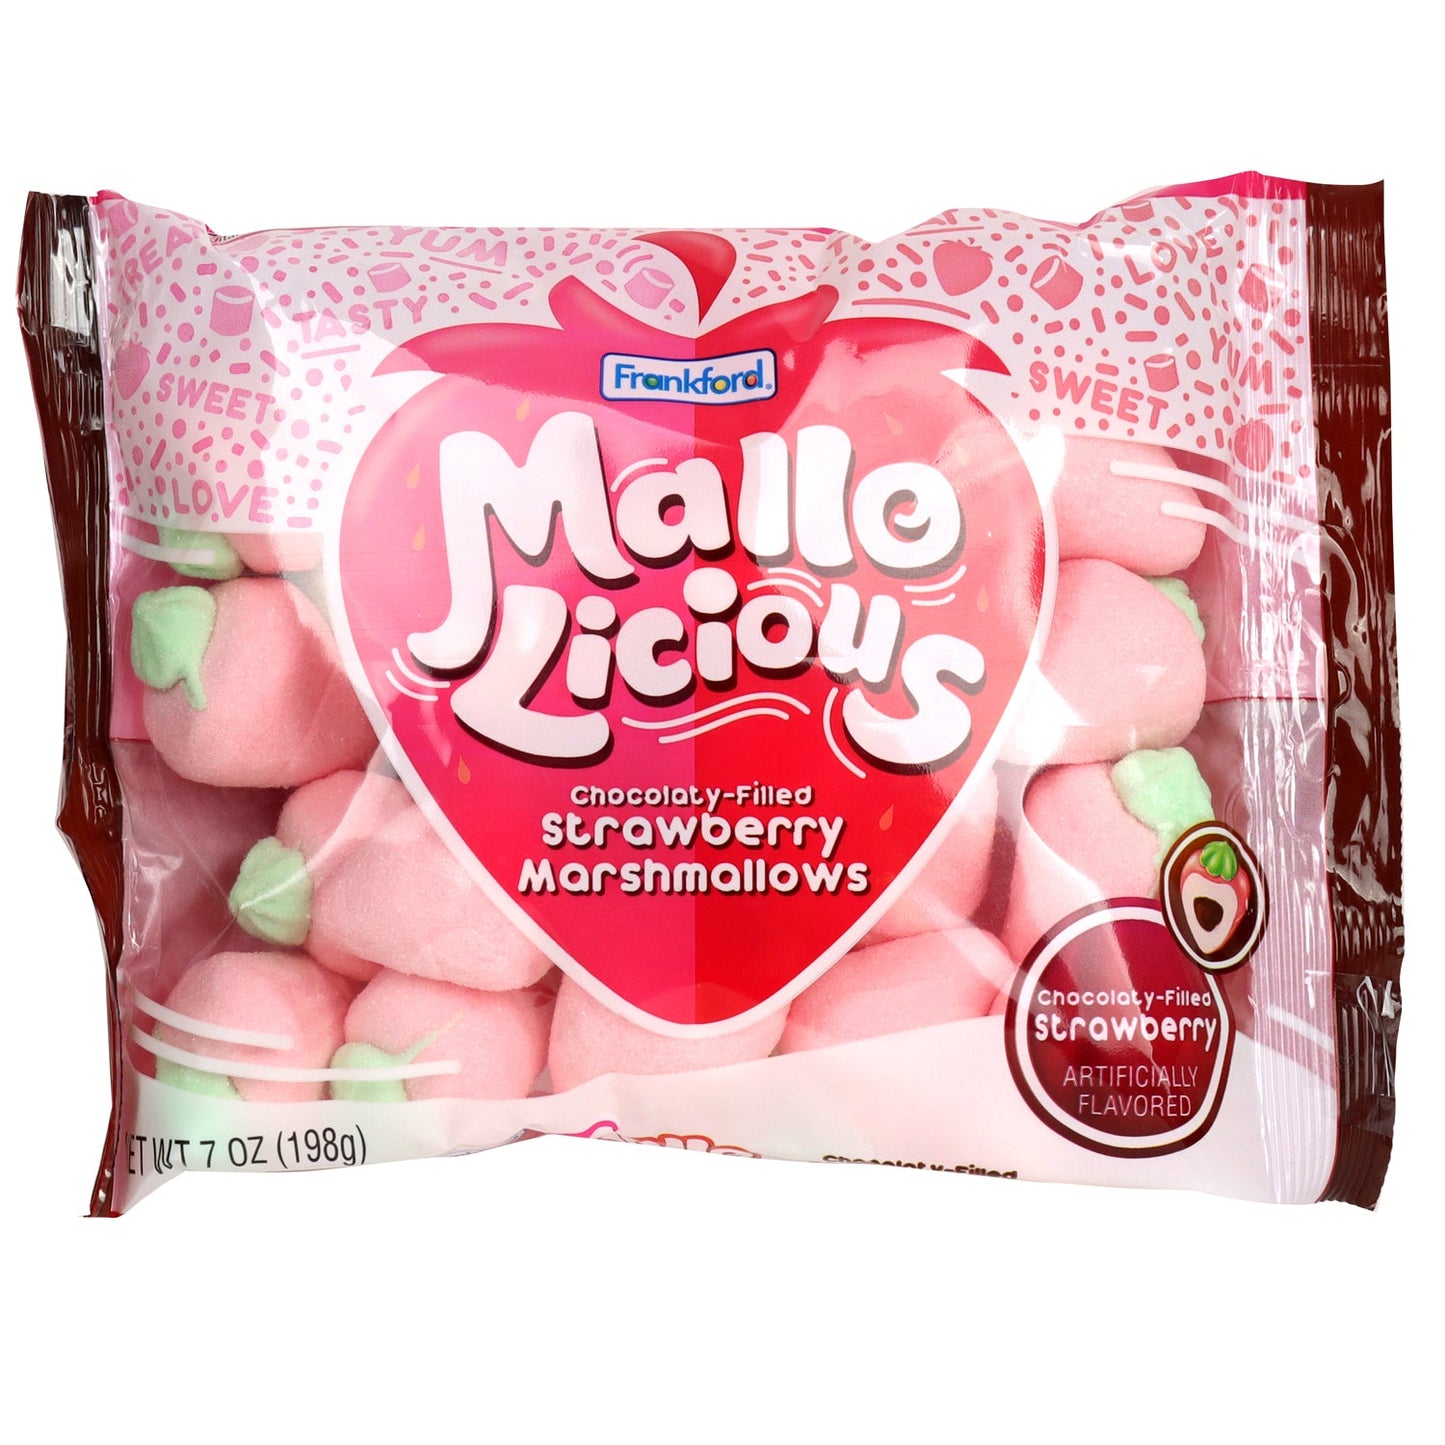 Jet-Puffed Has Heart-Shaped Strawberry Marshmallows to Complete